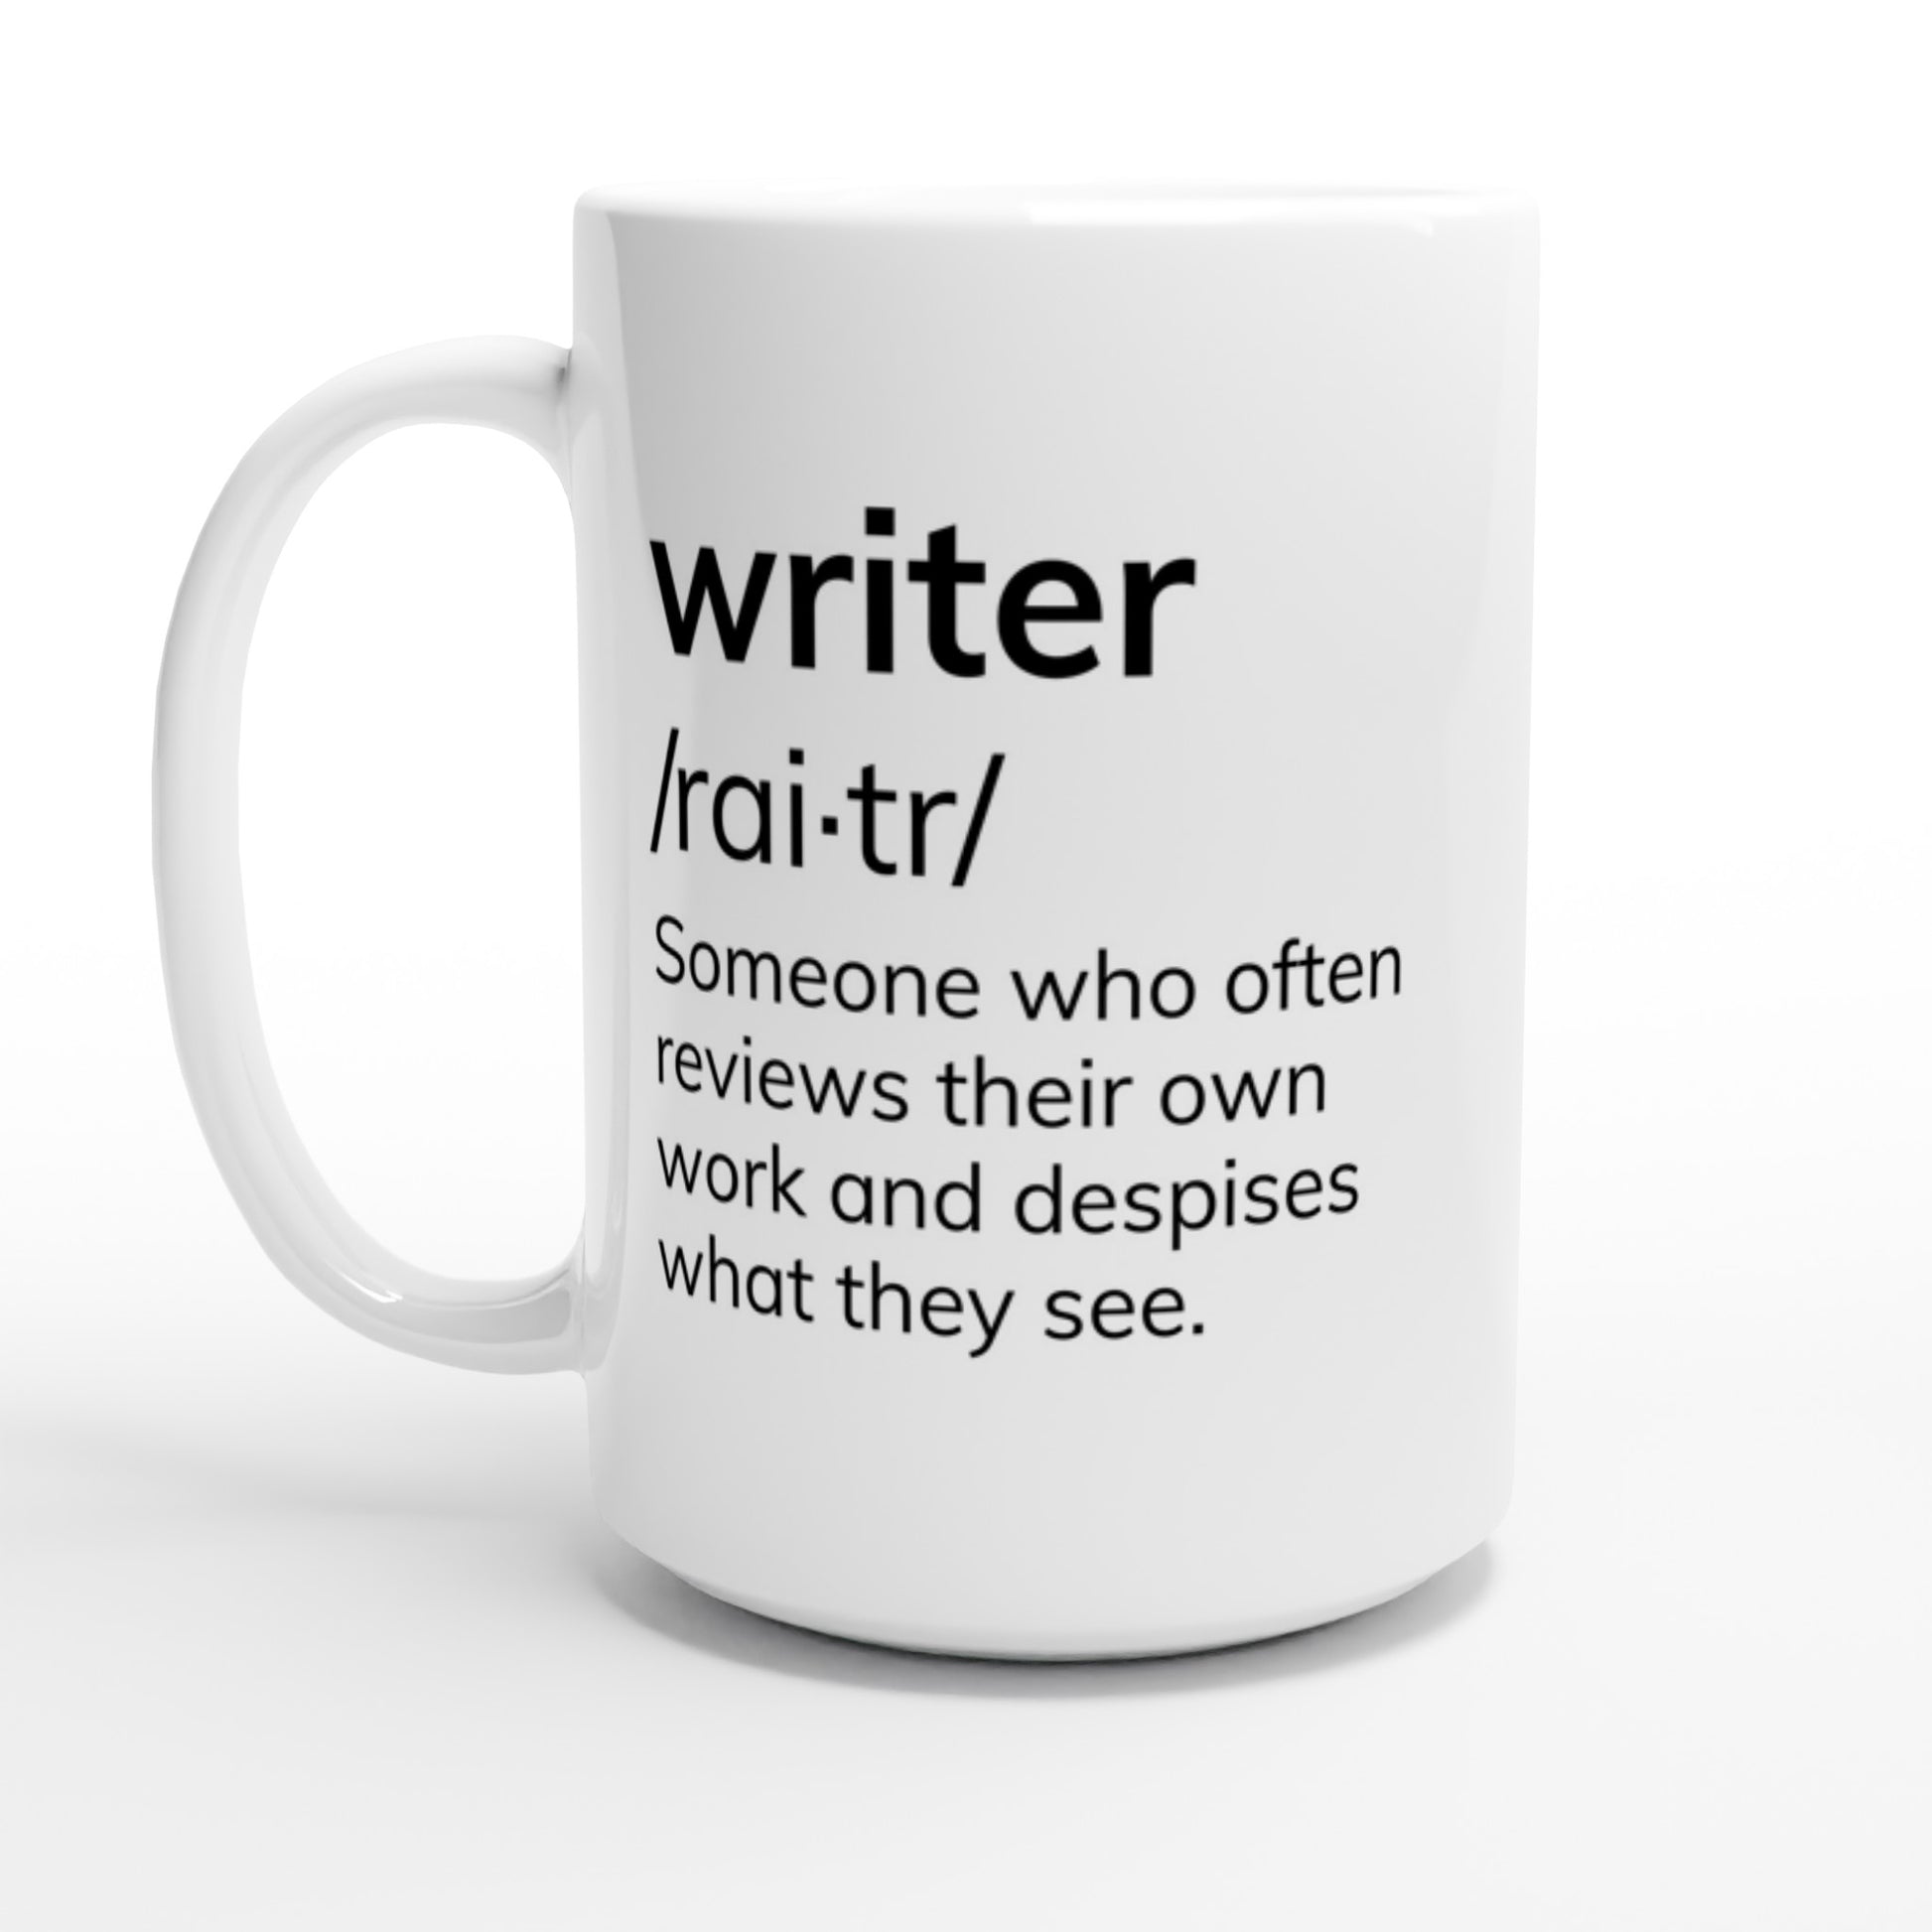 A Writing Themed Mug perfect for any writer. This mug features a simple design with the word "writer" prominently displayed. Whether you're sipping your morning coffee or fueling late-night, this Writing Themed Mug is perfect for someone who often reviews their own work and despises what they see.